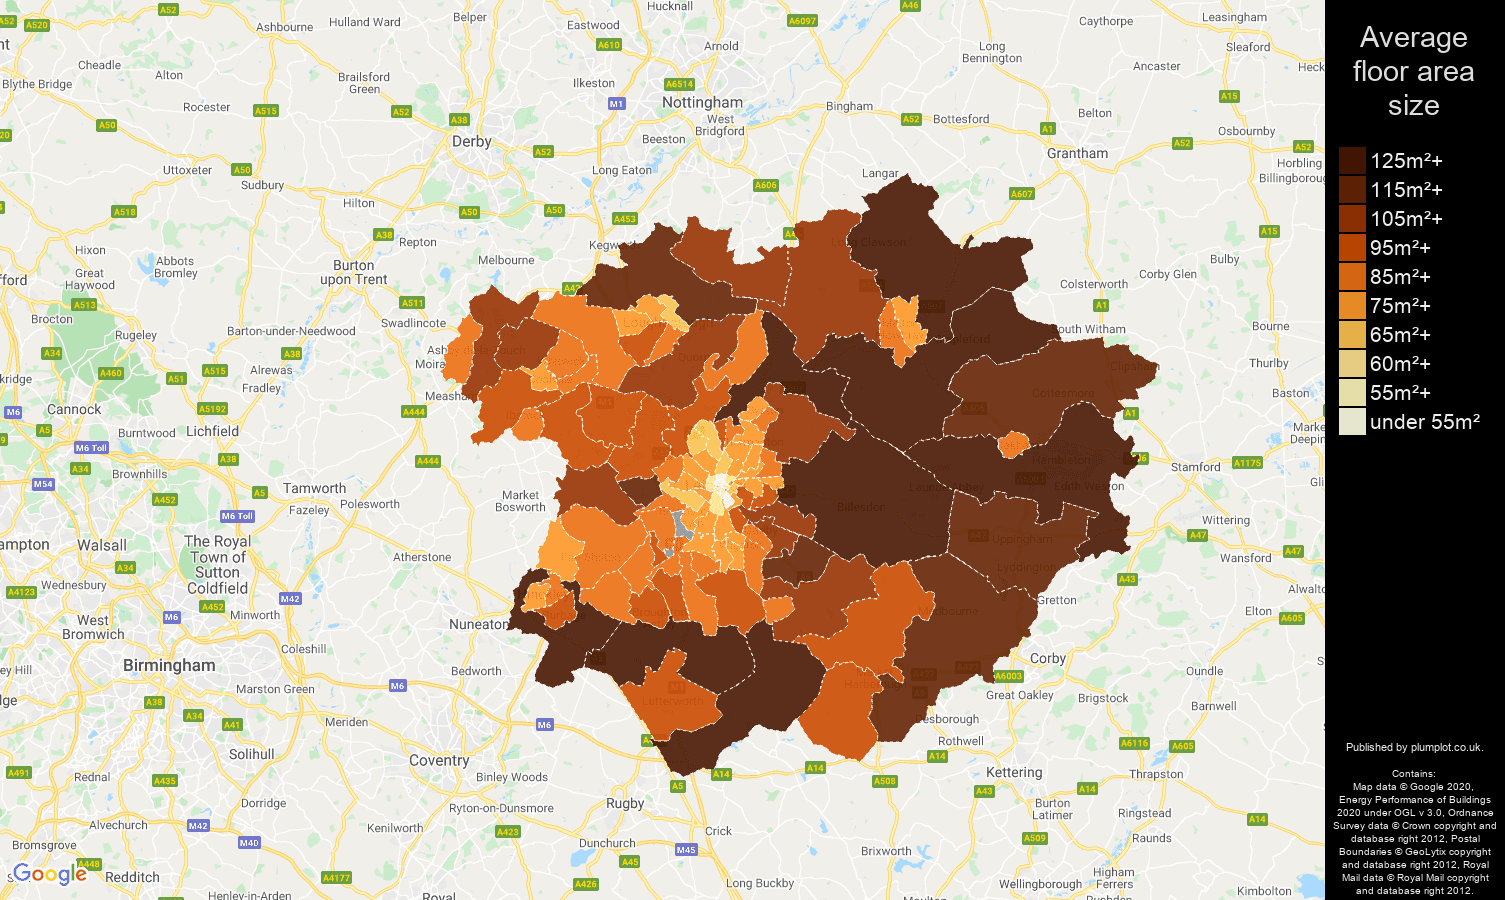 Leicester map of average floor area size of properties